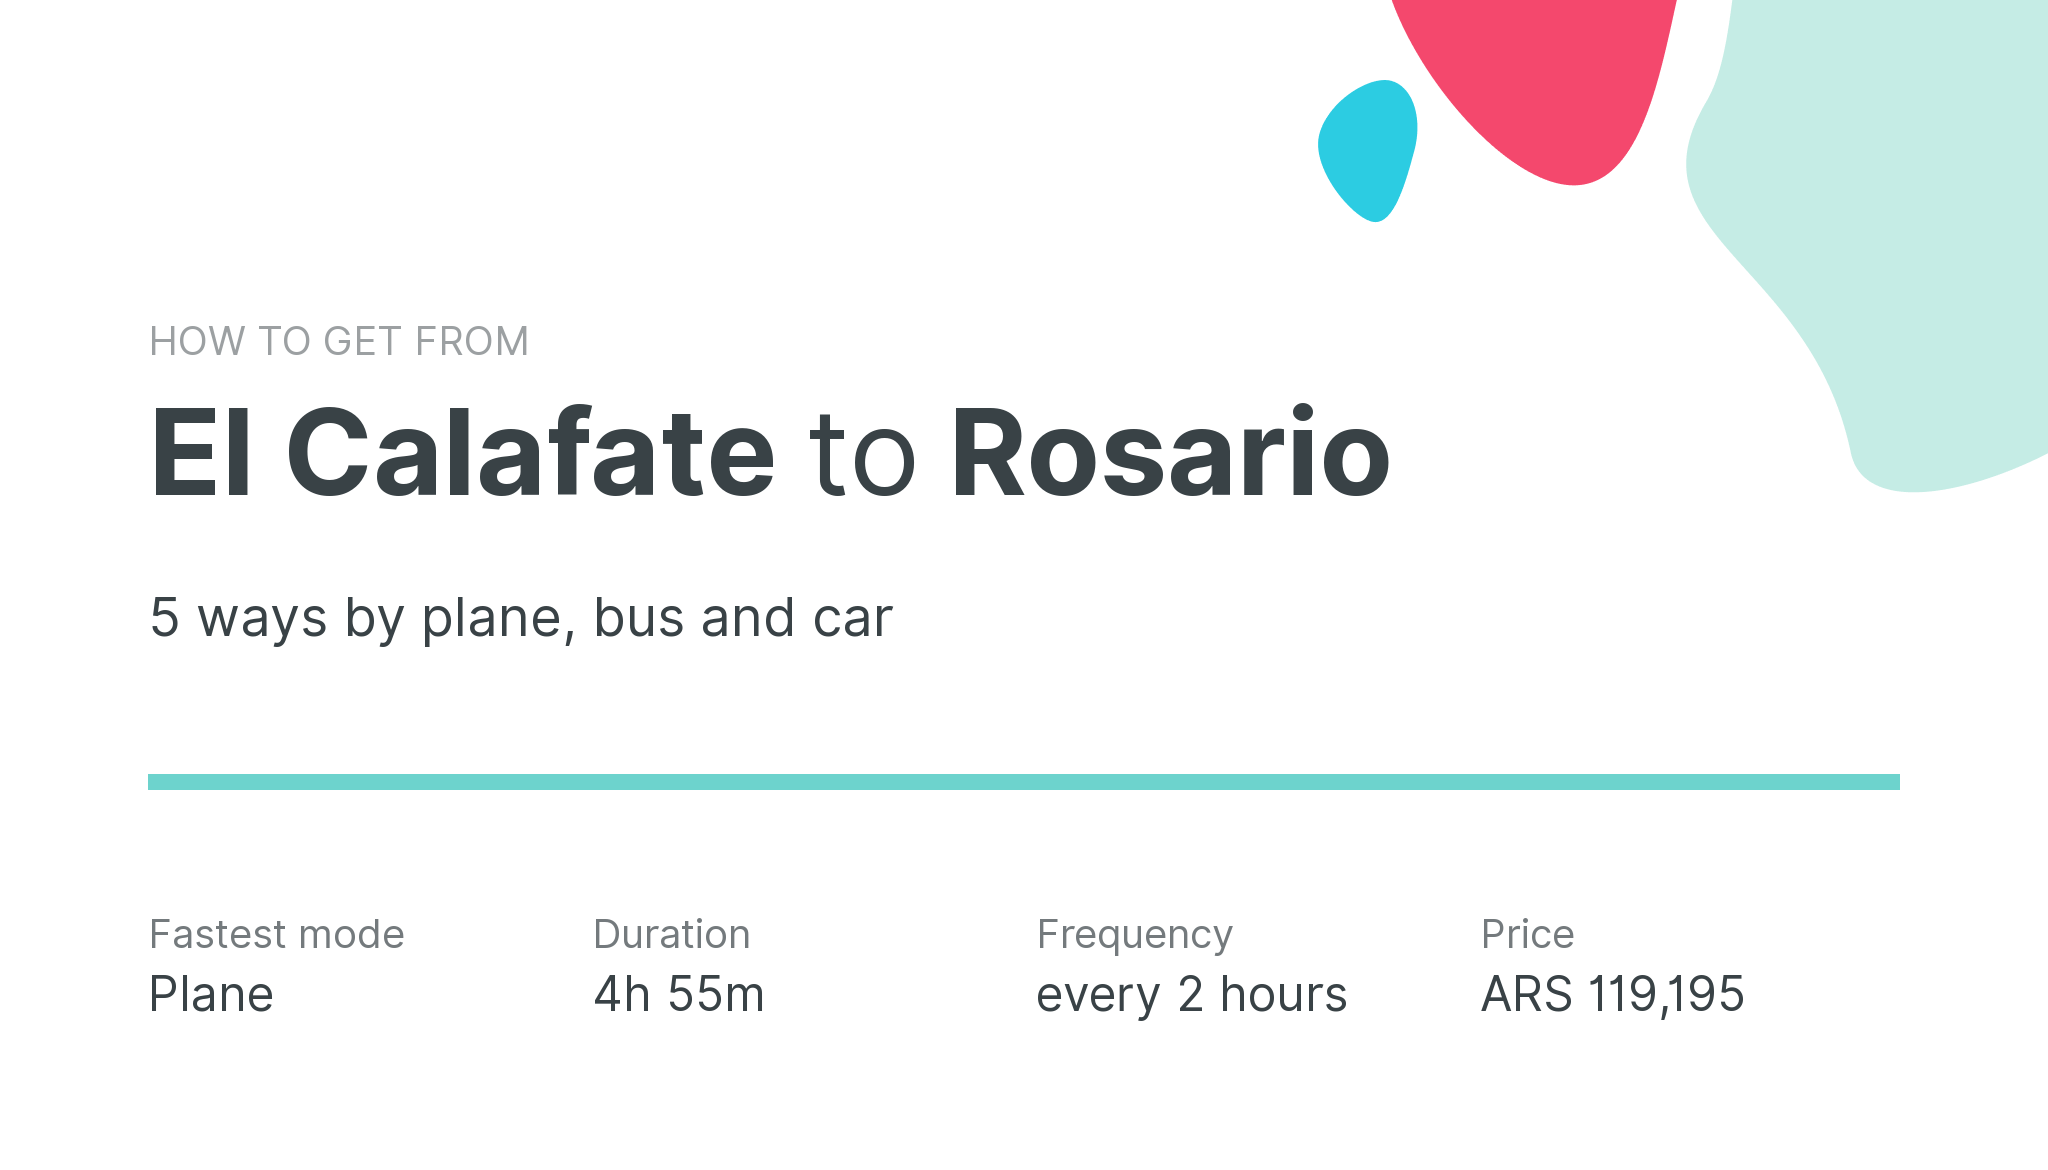 How do I get from El Calafate to Rosario